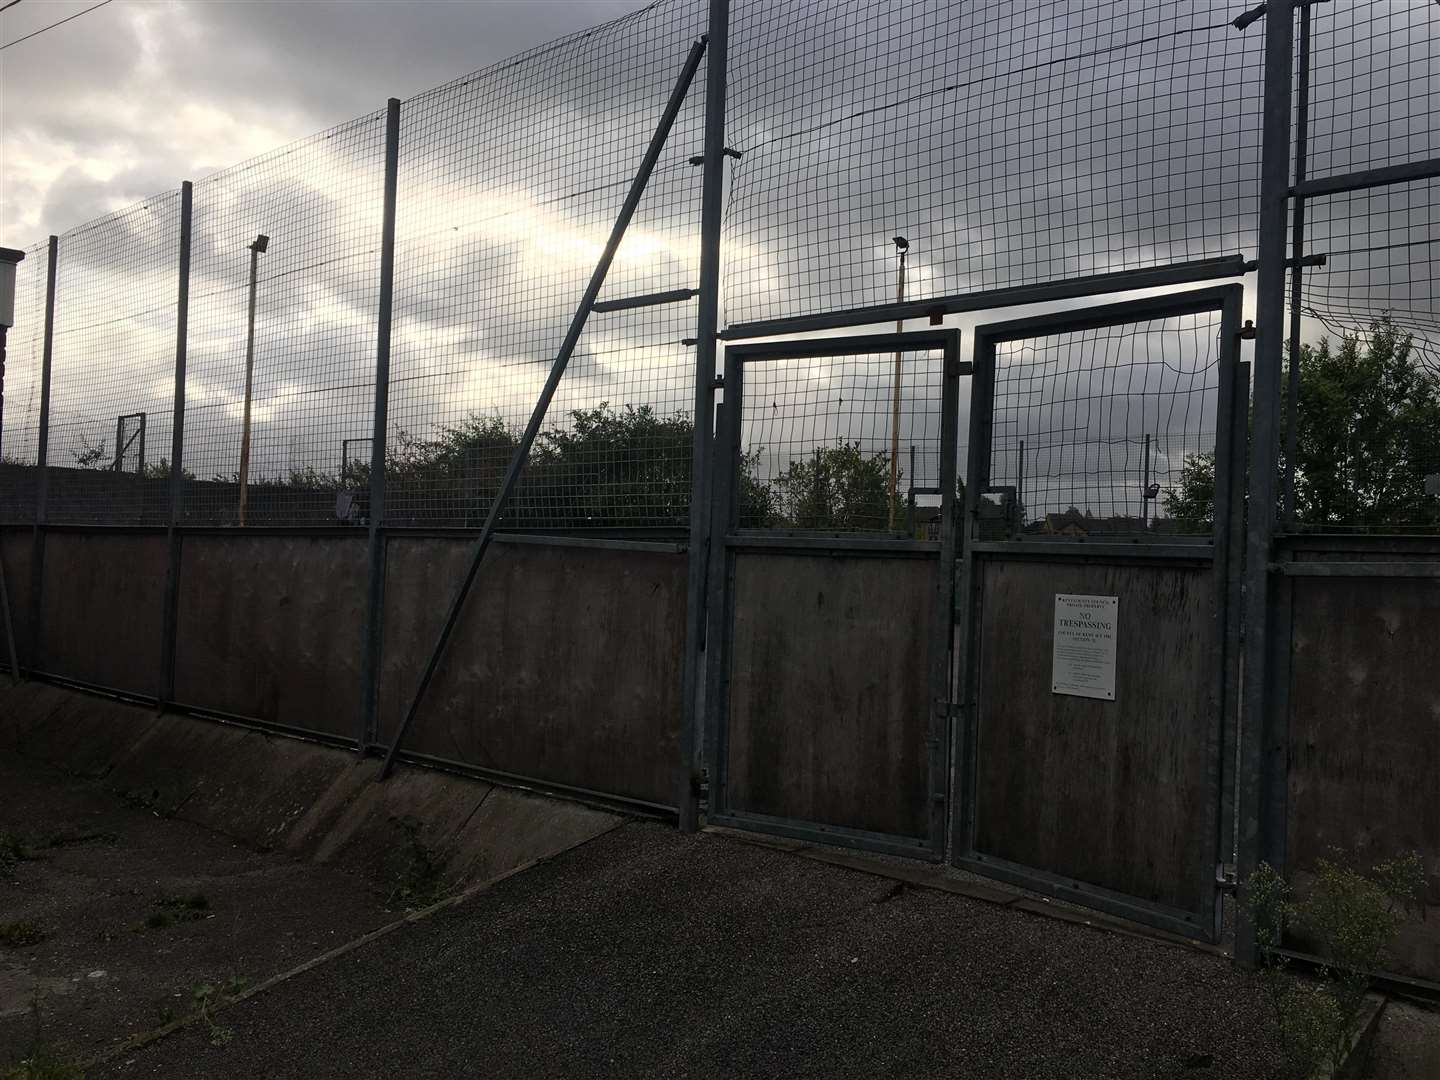 Human waste was left inside a football court on Shepway Green